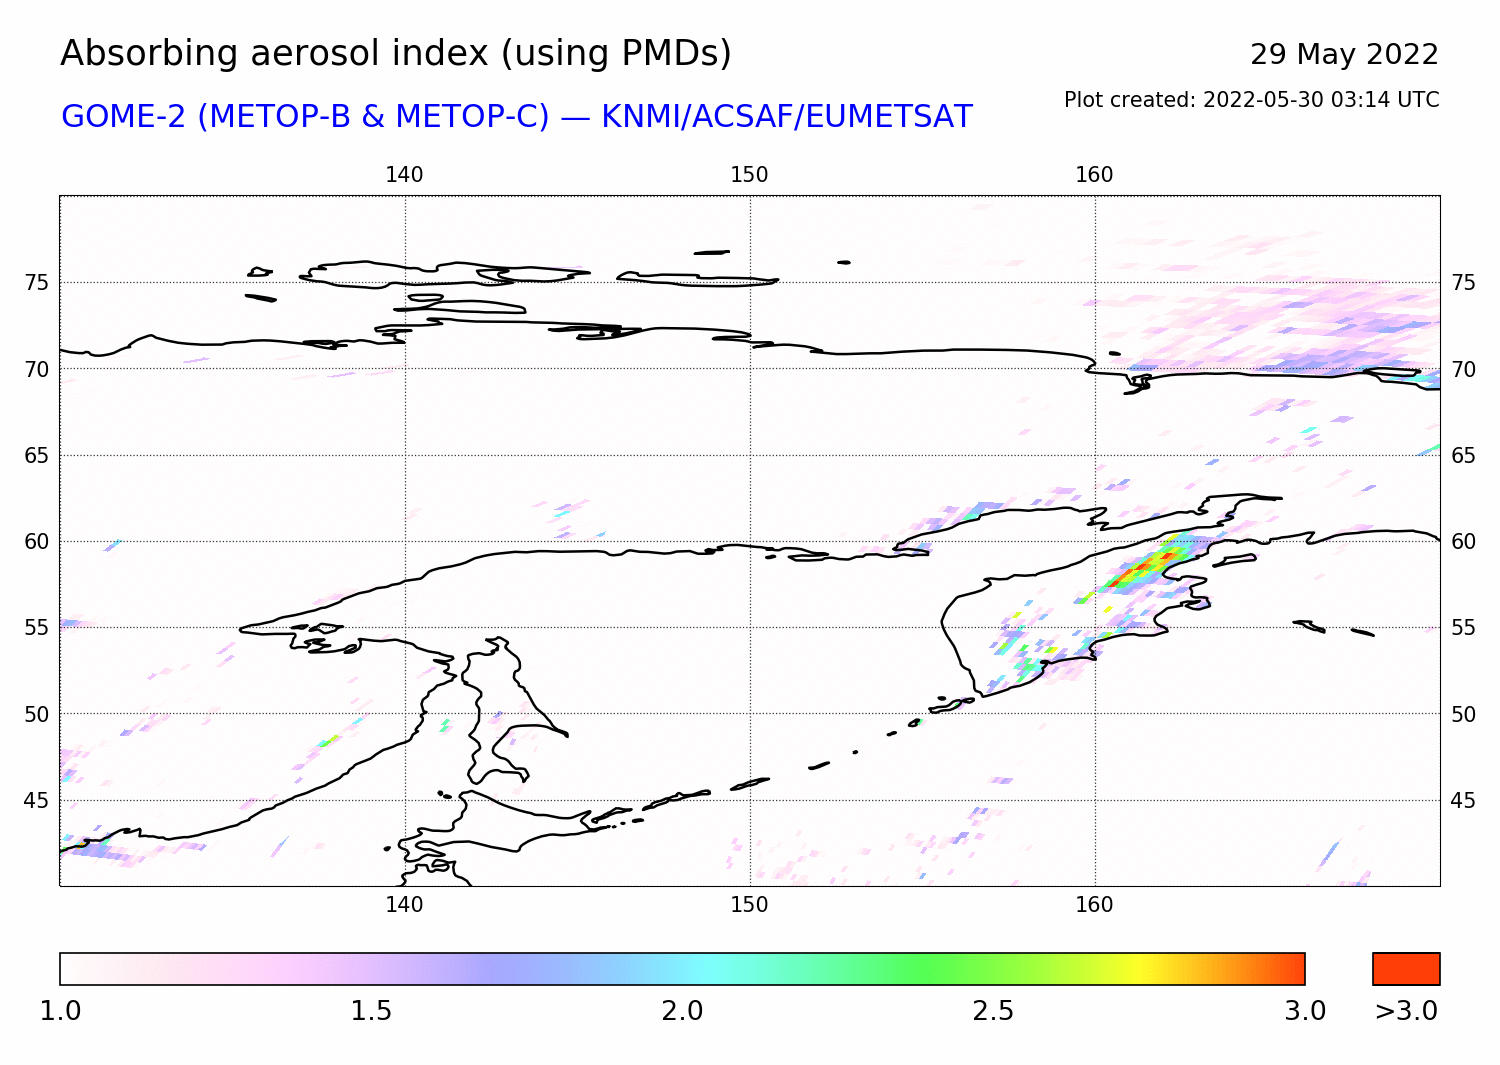 GOME-2 - Absorbing aerosol index of 29 May 2022